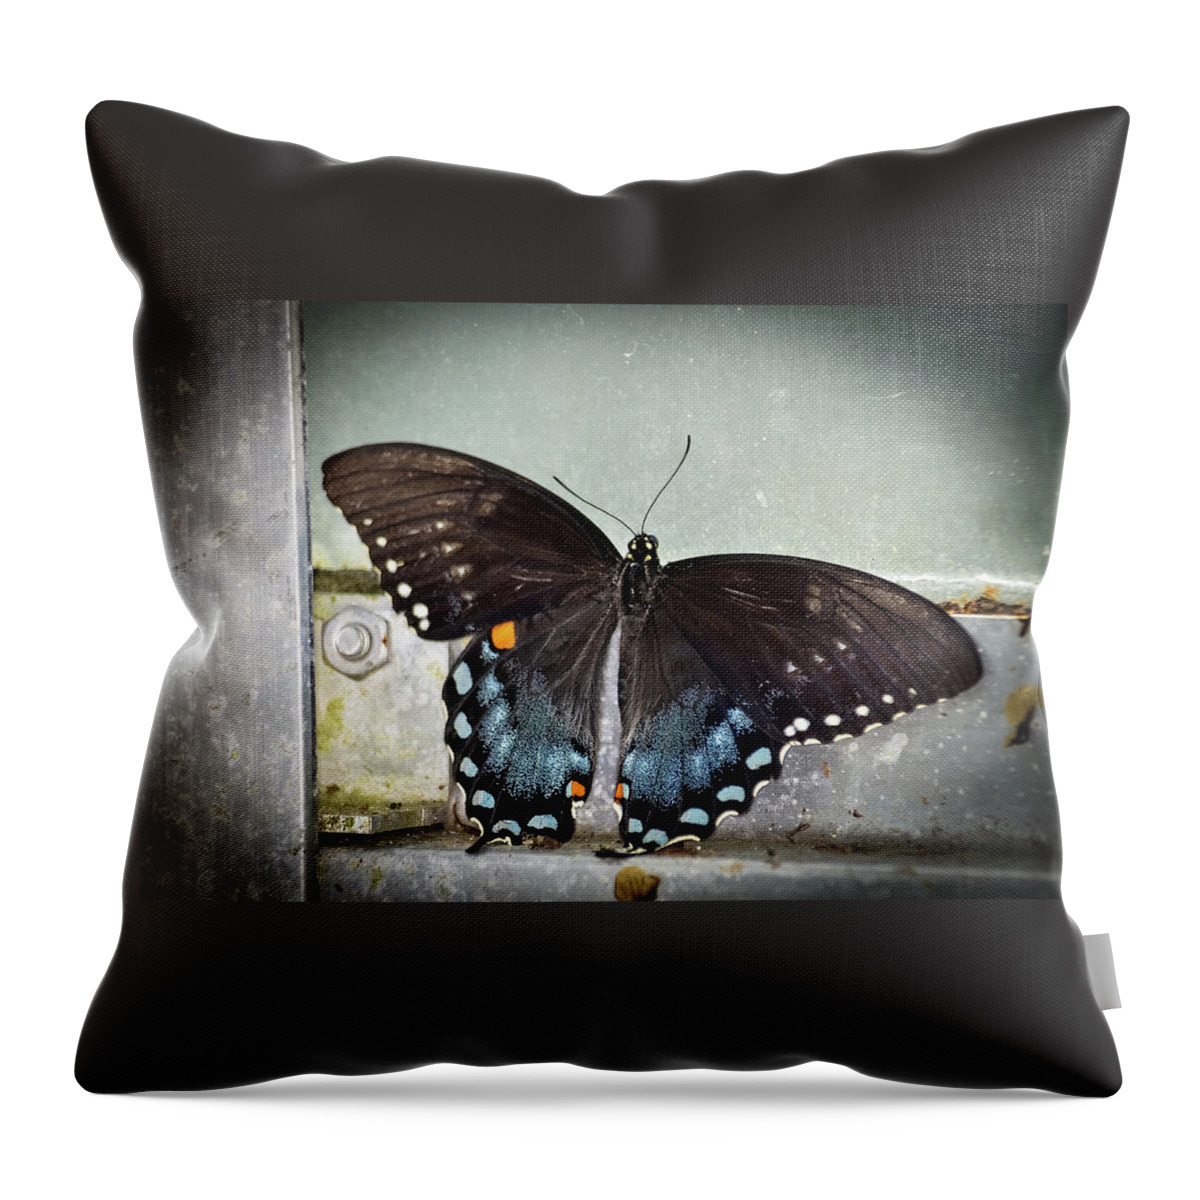 Butterfly Throw Pillow featuring the photograph Black Swallowtail on Window by Artful Imagery